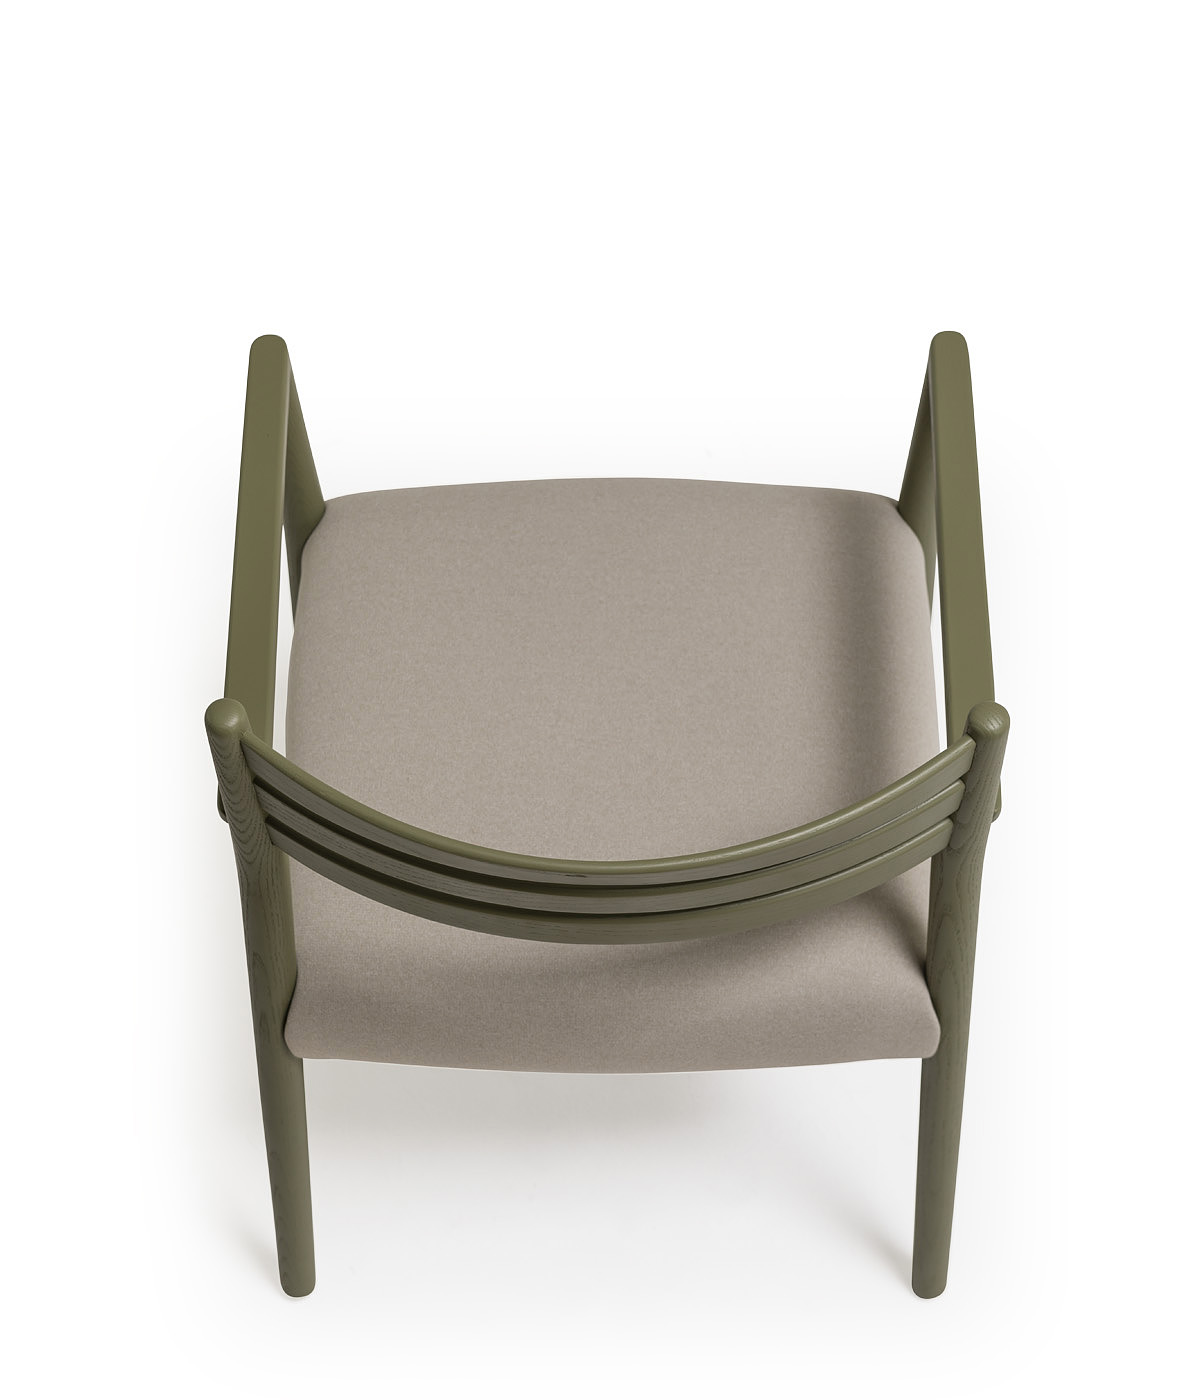 Bogart chair with armrests and upholstered seat and backrest - Vergés